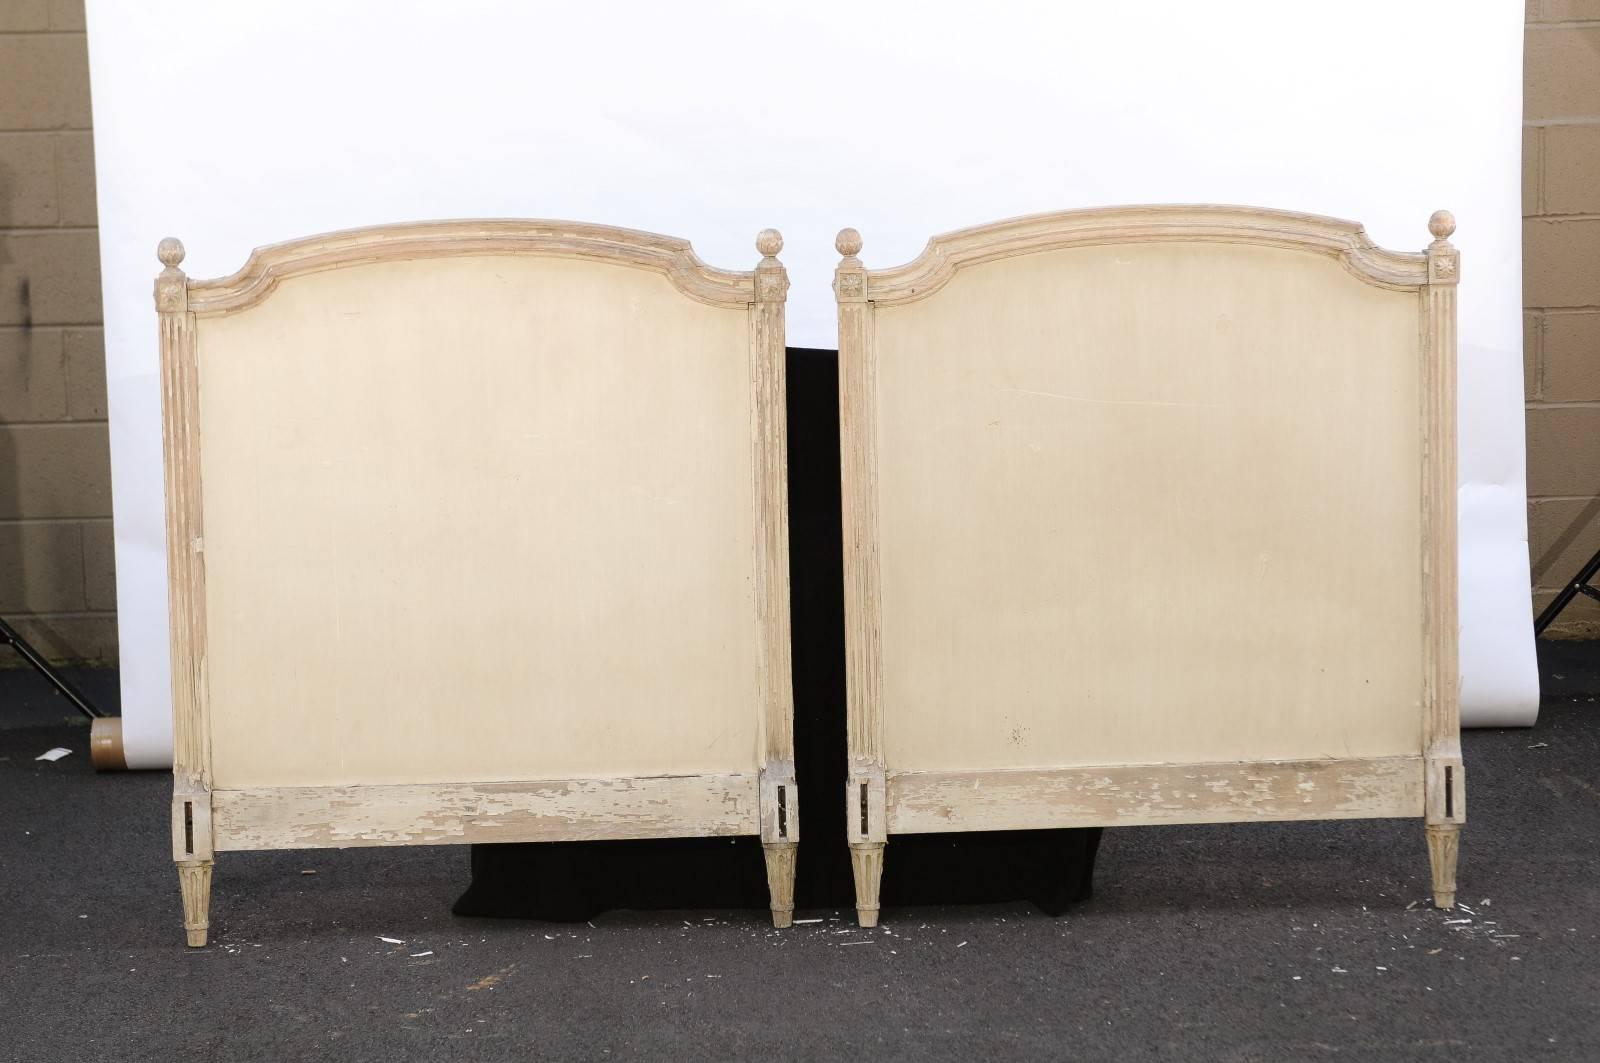 This pair of French 19th century twin-sized bed headboards features elegant Louis XVI style frames with round finials, carved rosettes over nicely fluted side posts. The central wooden panel is painted in a off-white / light cream tone. The ensemble